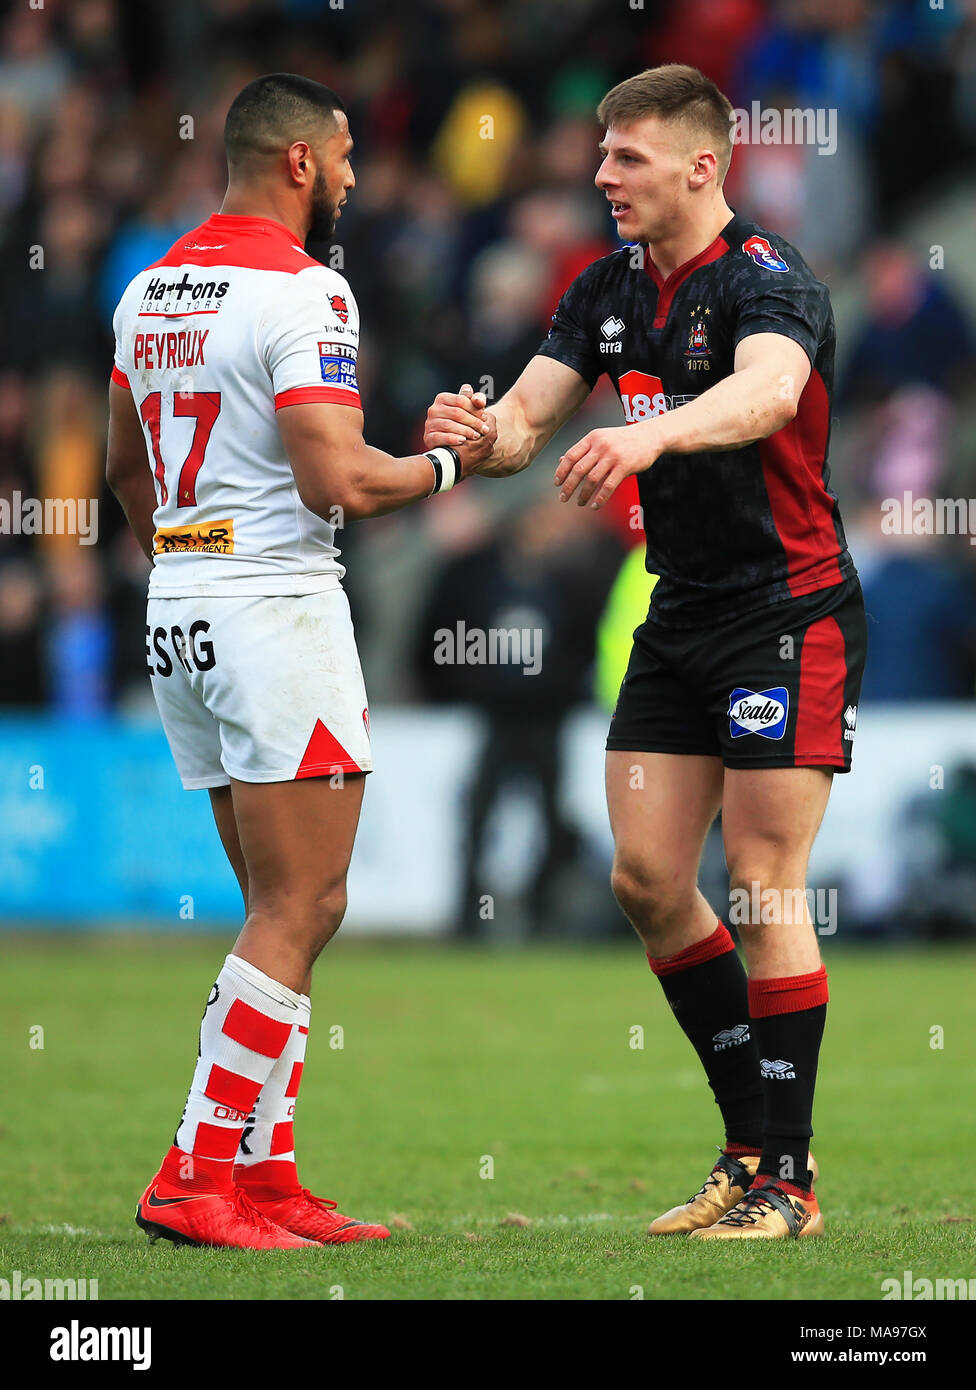 St Helens' Dominique Peyroux shakes hands with Wigan Warriors' Tom Davies  during the Super League match at the Totally Wicked Stadium, St Helens.  PRESS ASSOCIATION Photo. Picture date: Friday March 30, 2018.